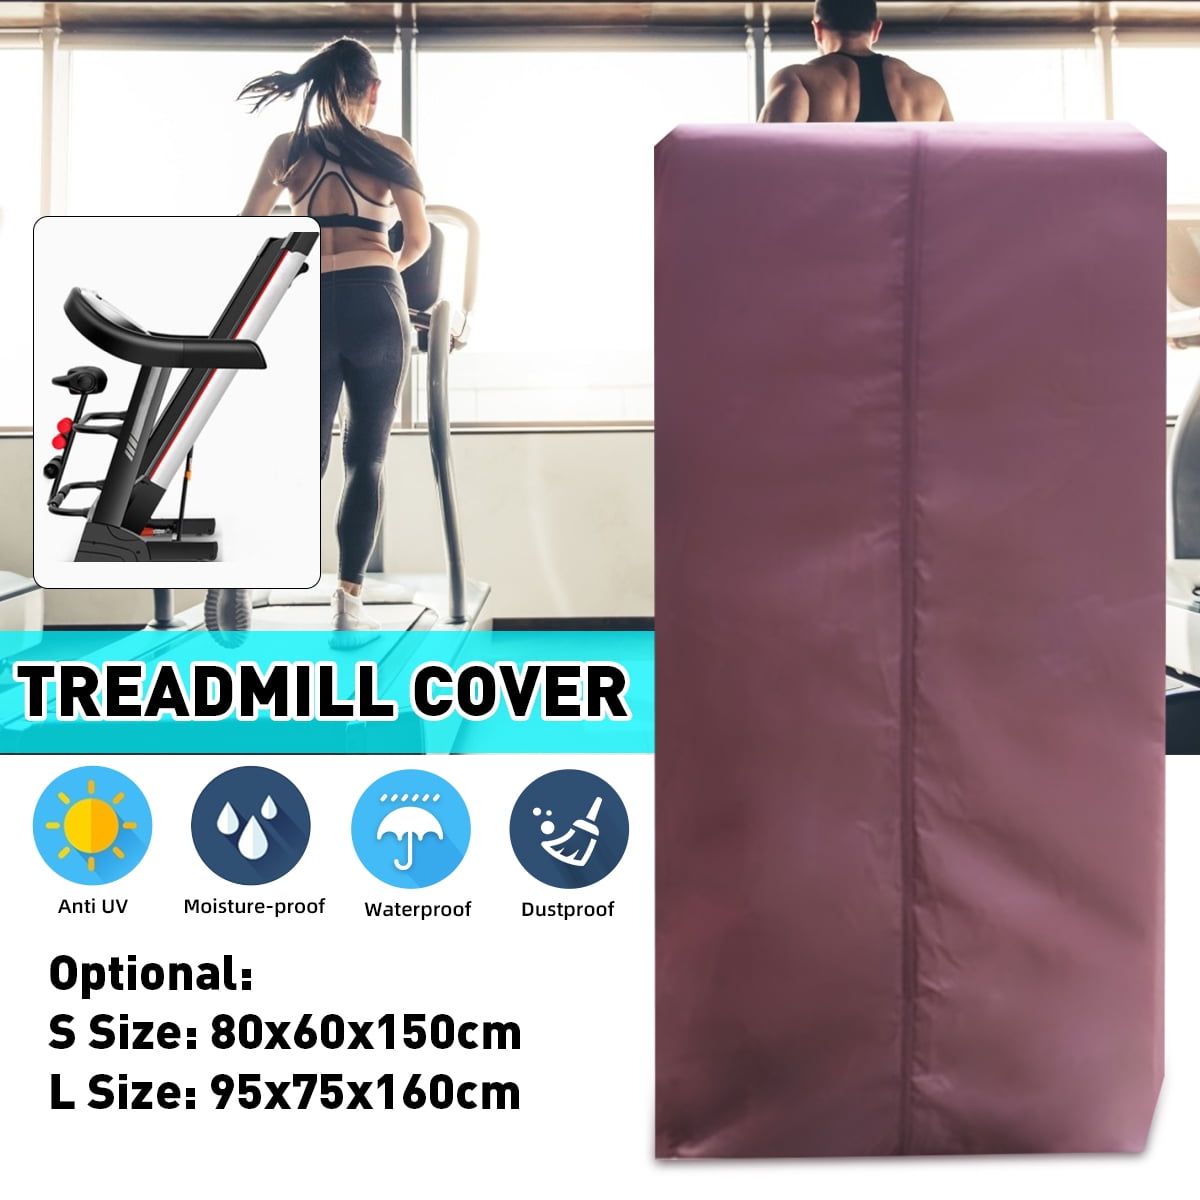 Treadmill Cover Folding/Non-folding Running Machine Protective Cover Dustproof Waterproof Cover Fabric Ideal for Indoor or Outdoor Use,White,80x60x150cm